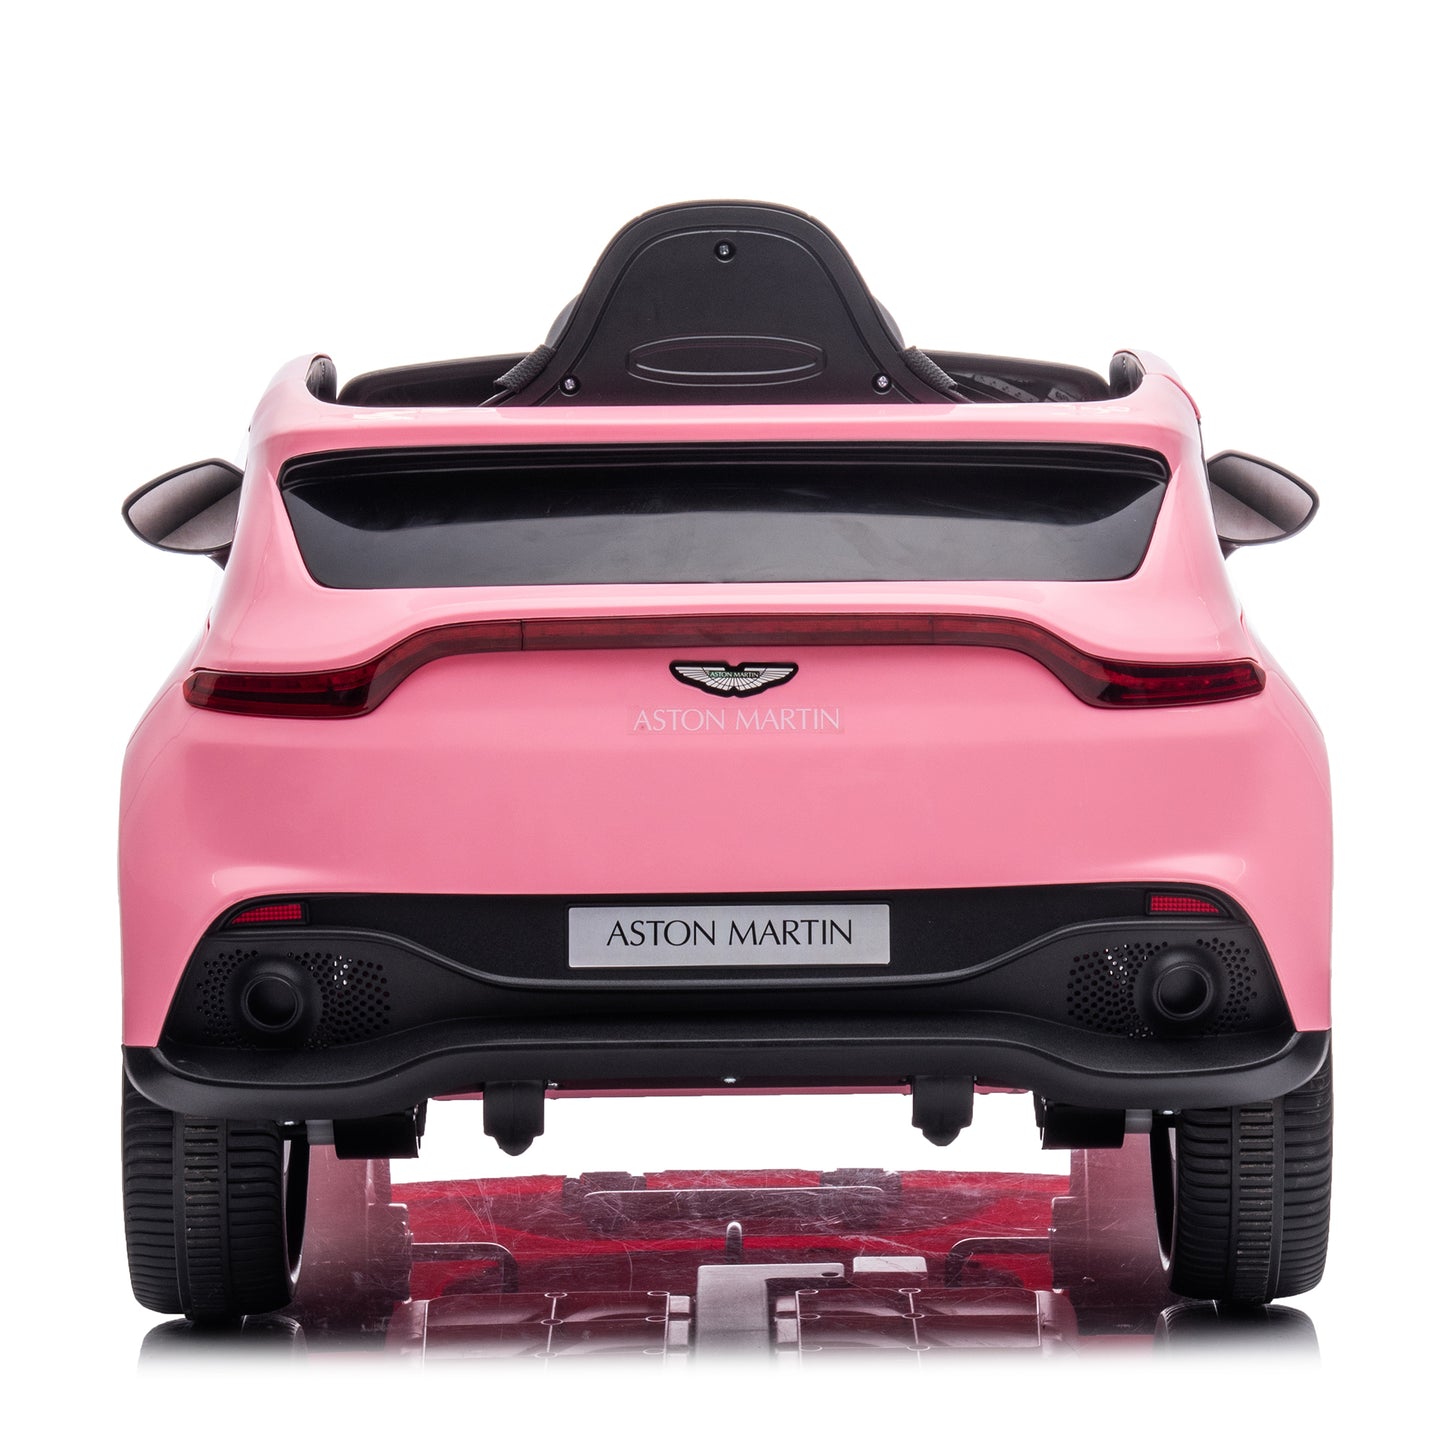 12V Dual-drive remote control electric Kid Ride On Car,Battery Powered Kids Ride-on Car pink, 4 Wheels Children toys vehicle,LED Headlights,remote control,music,USB.